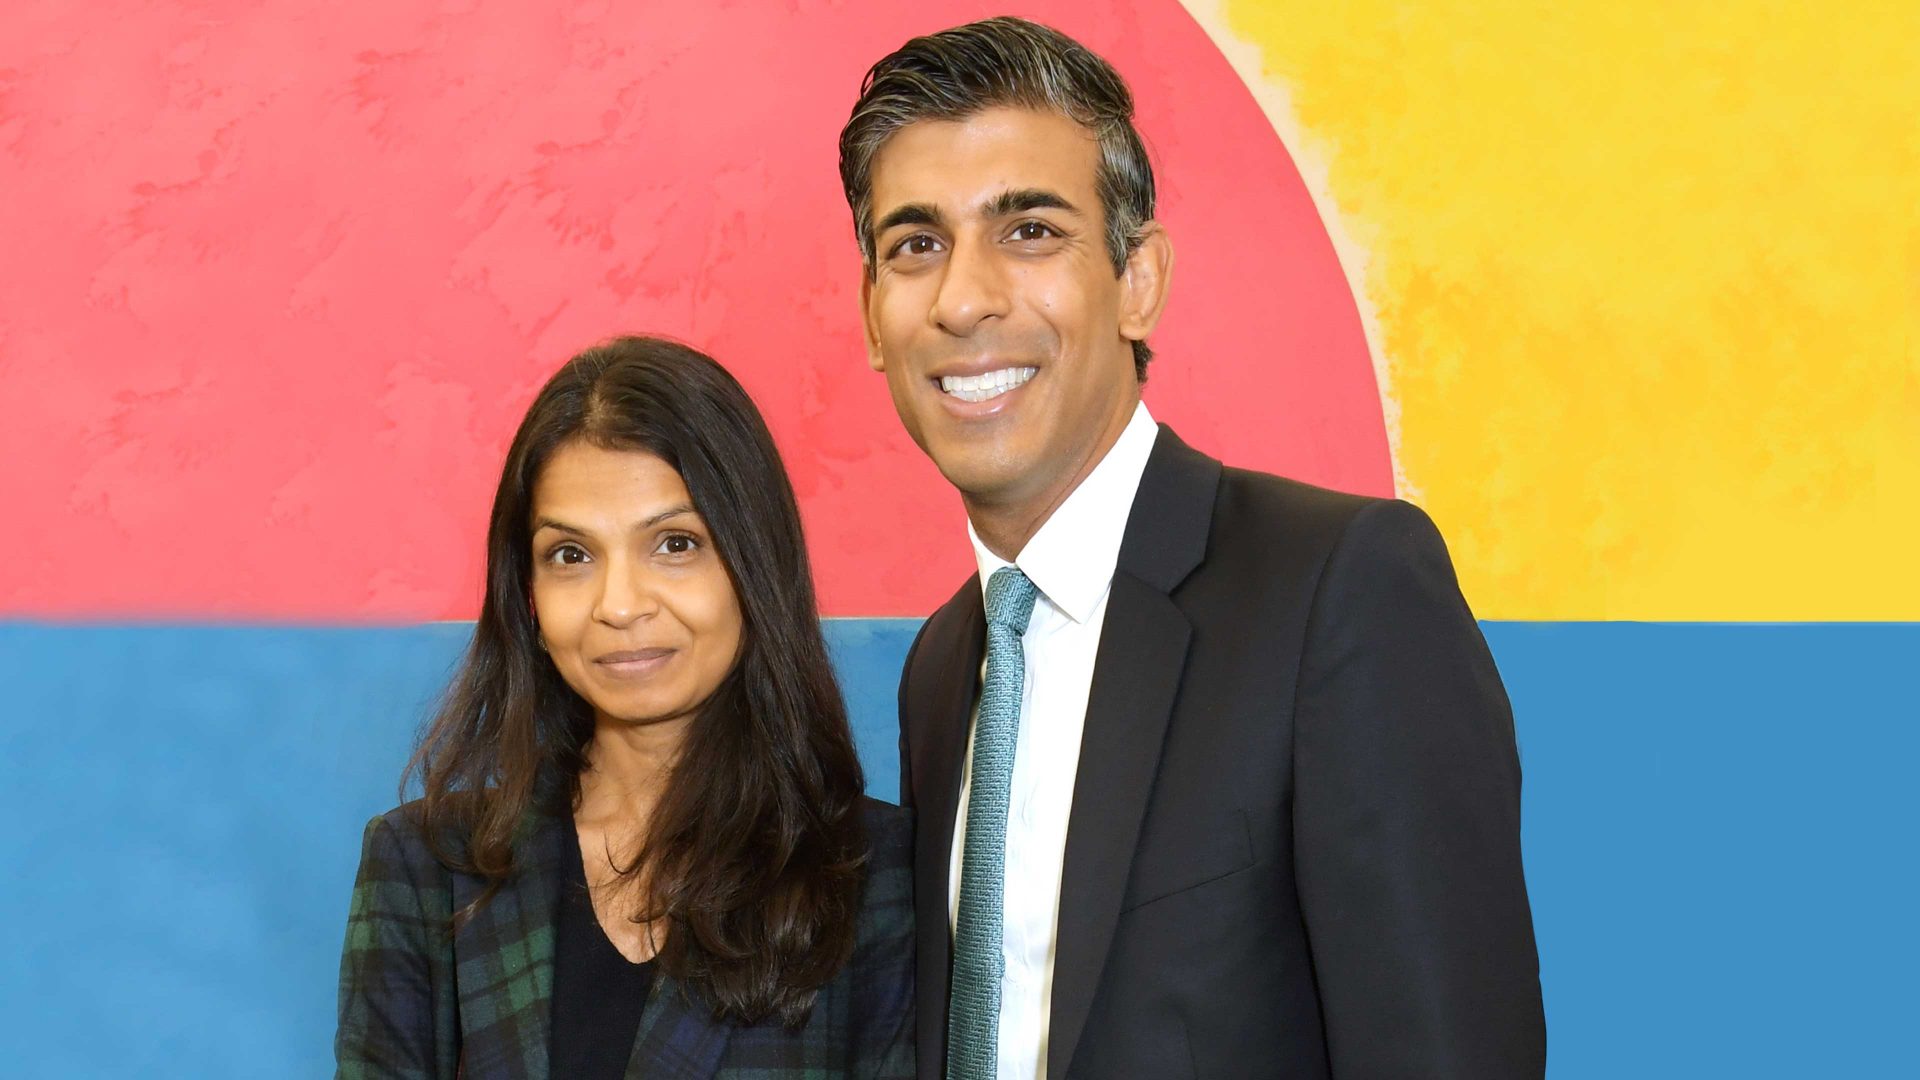 Rishi Sunak’s wife, Akshata Murty, received nearly £6.7m in dividends from shares in her father’s company last year. Photo: David M Benett/Getty